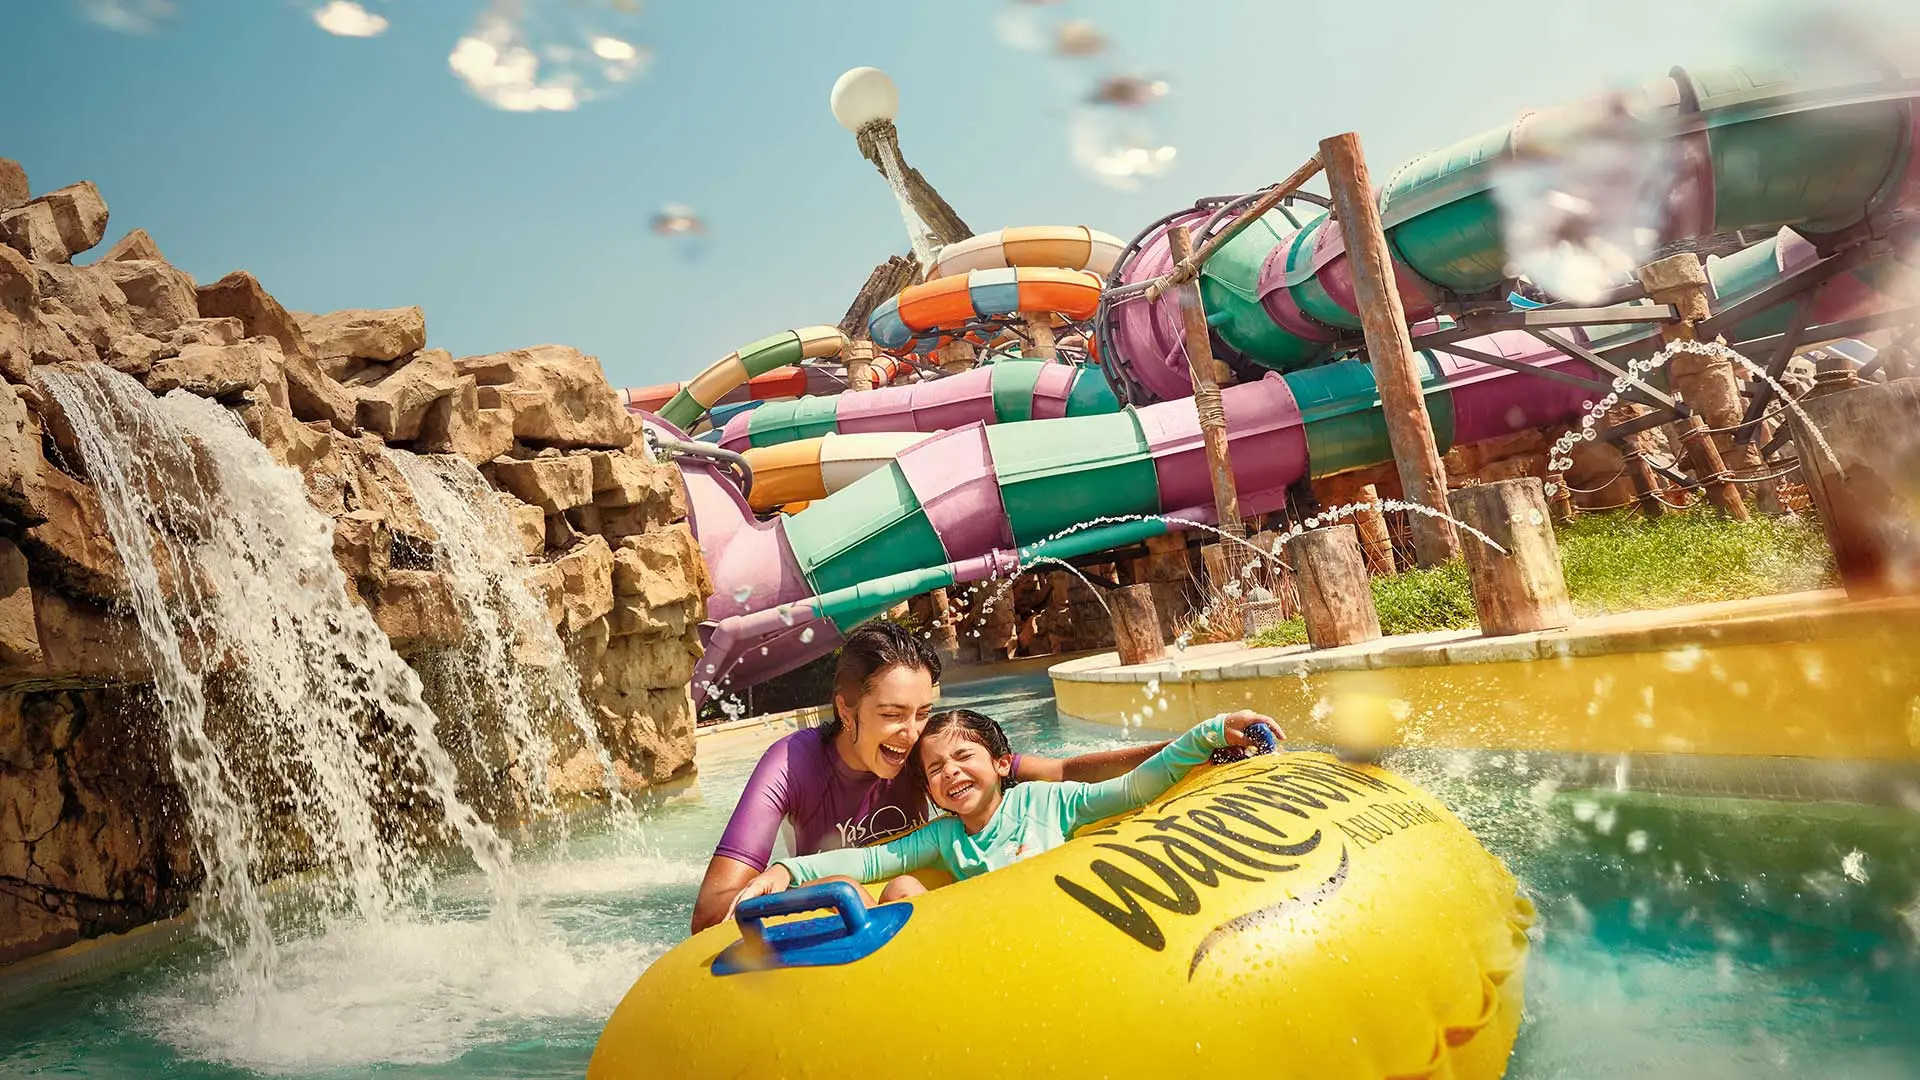 ferrari world and yas water park tickets - Does Ferrari World have water park